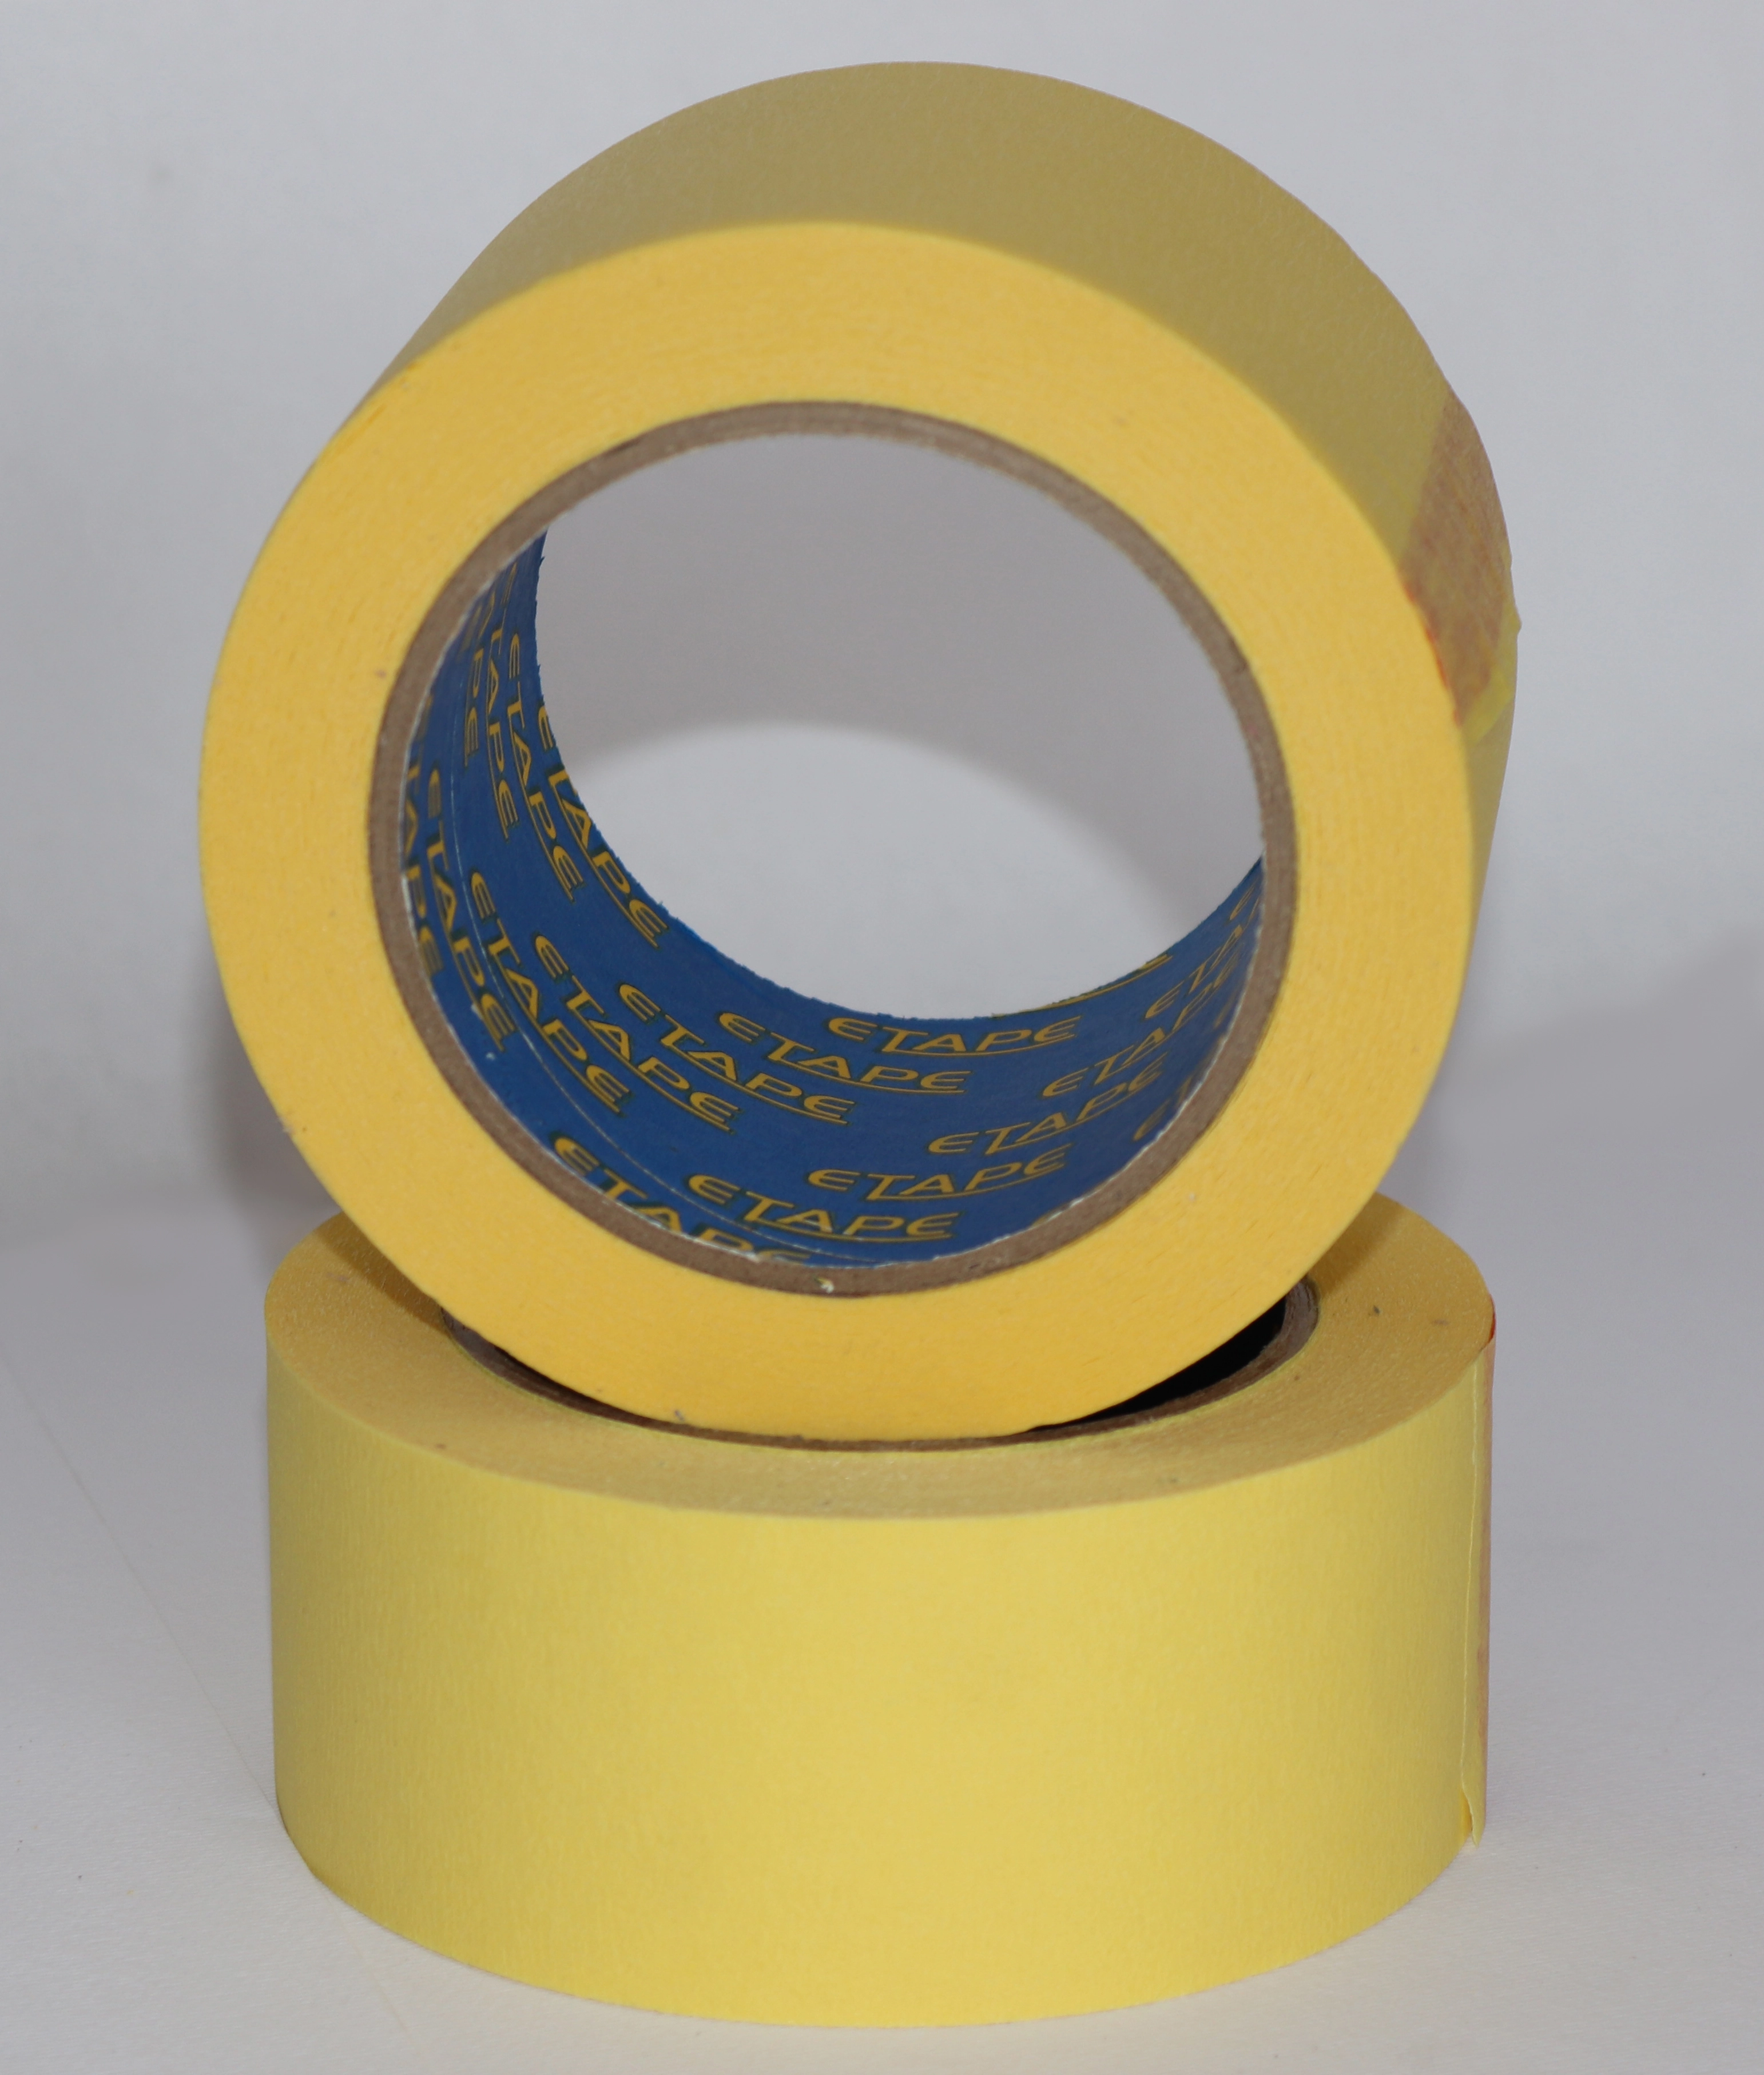 Packaging tape used for security and packaging sold by Easitape